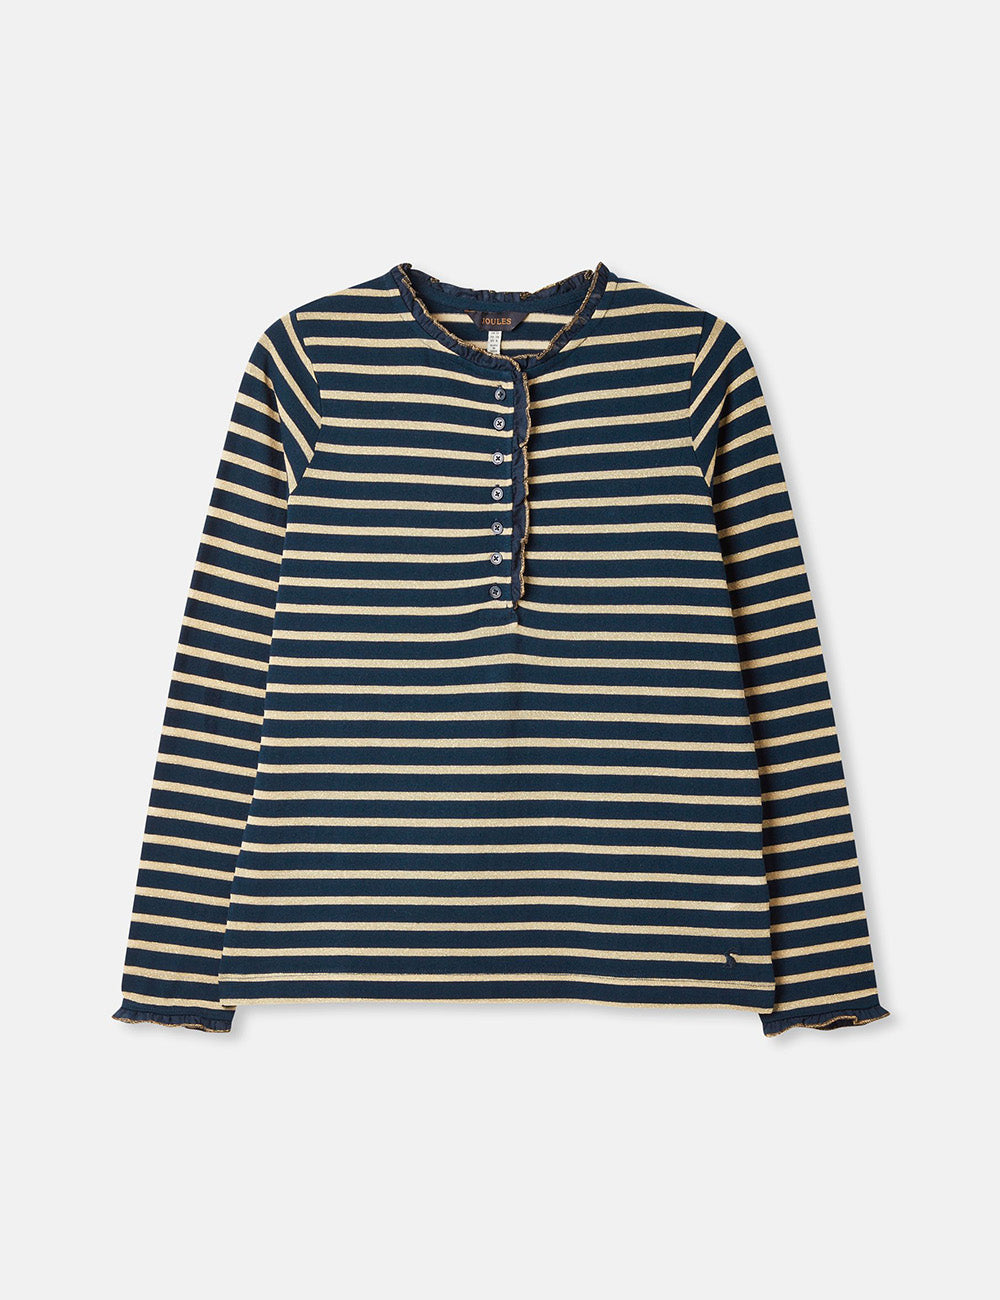 Joules Daphne Long Sleeve  Top - Navy/Gold Stripe